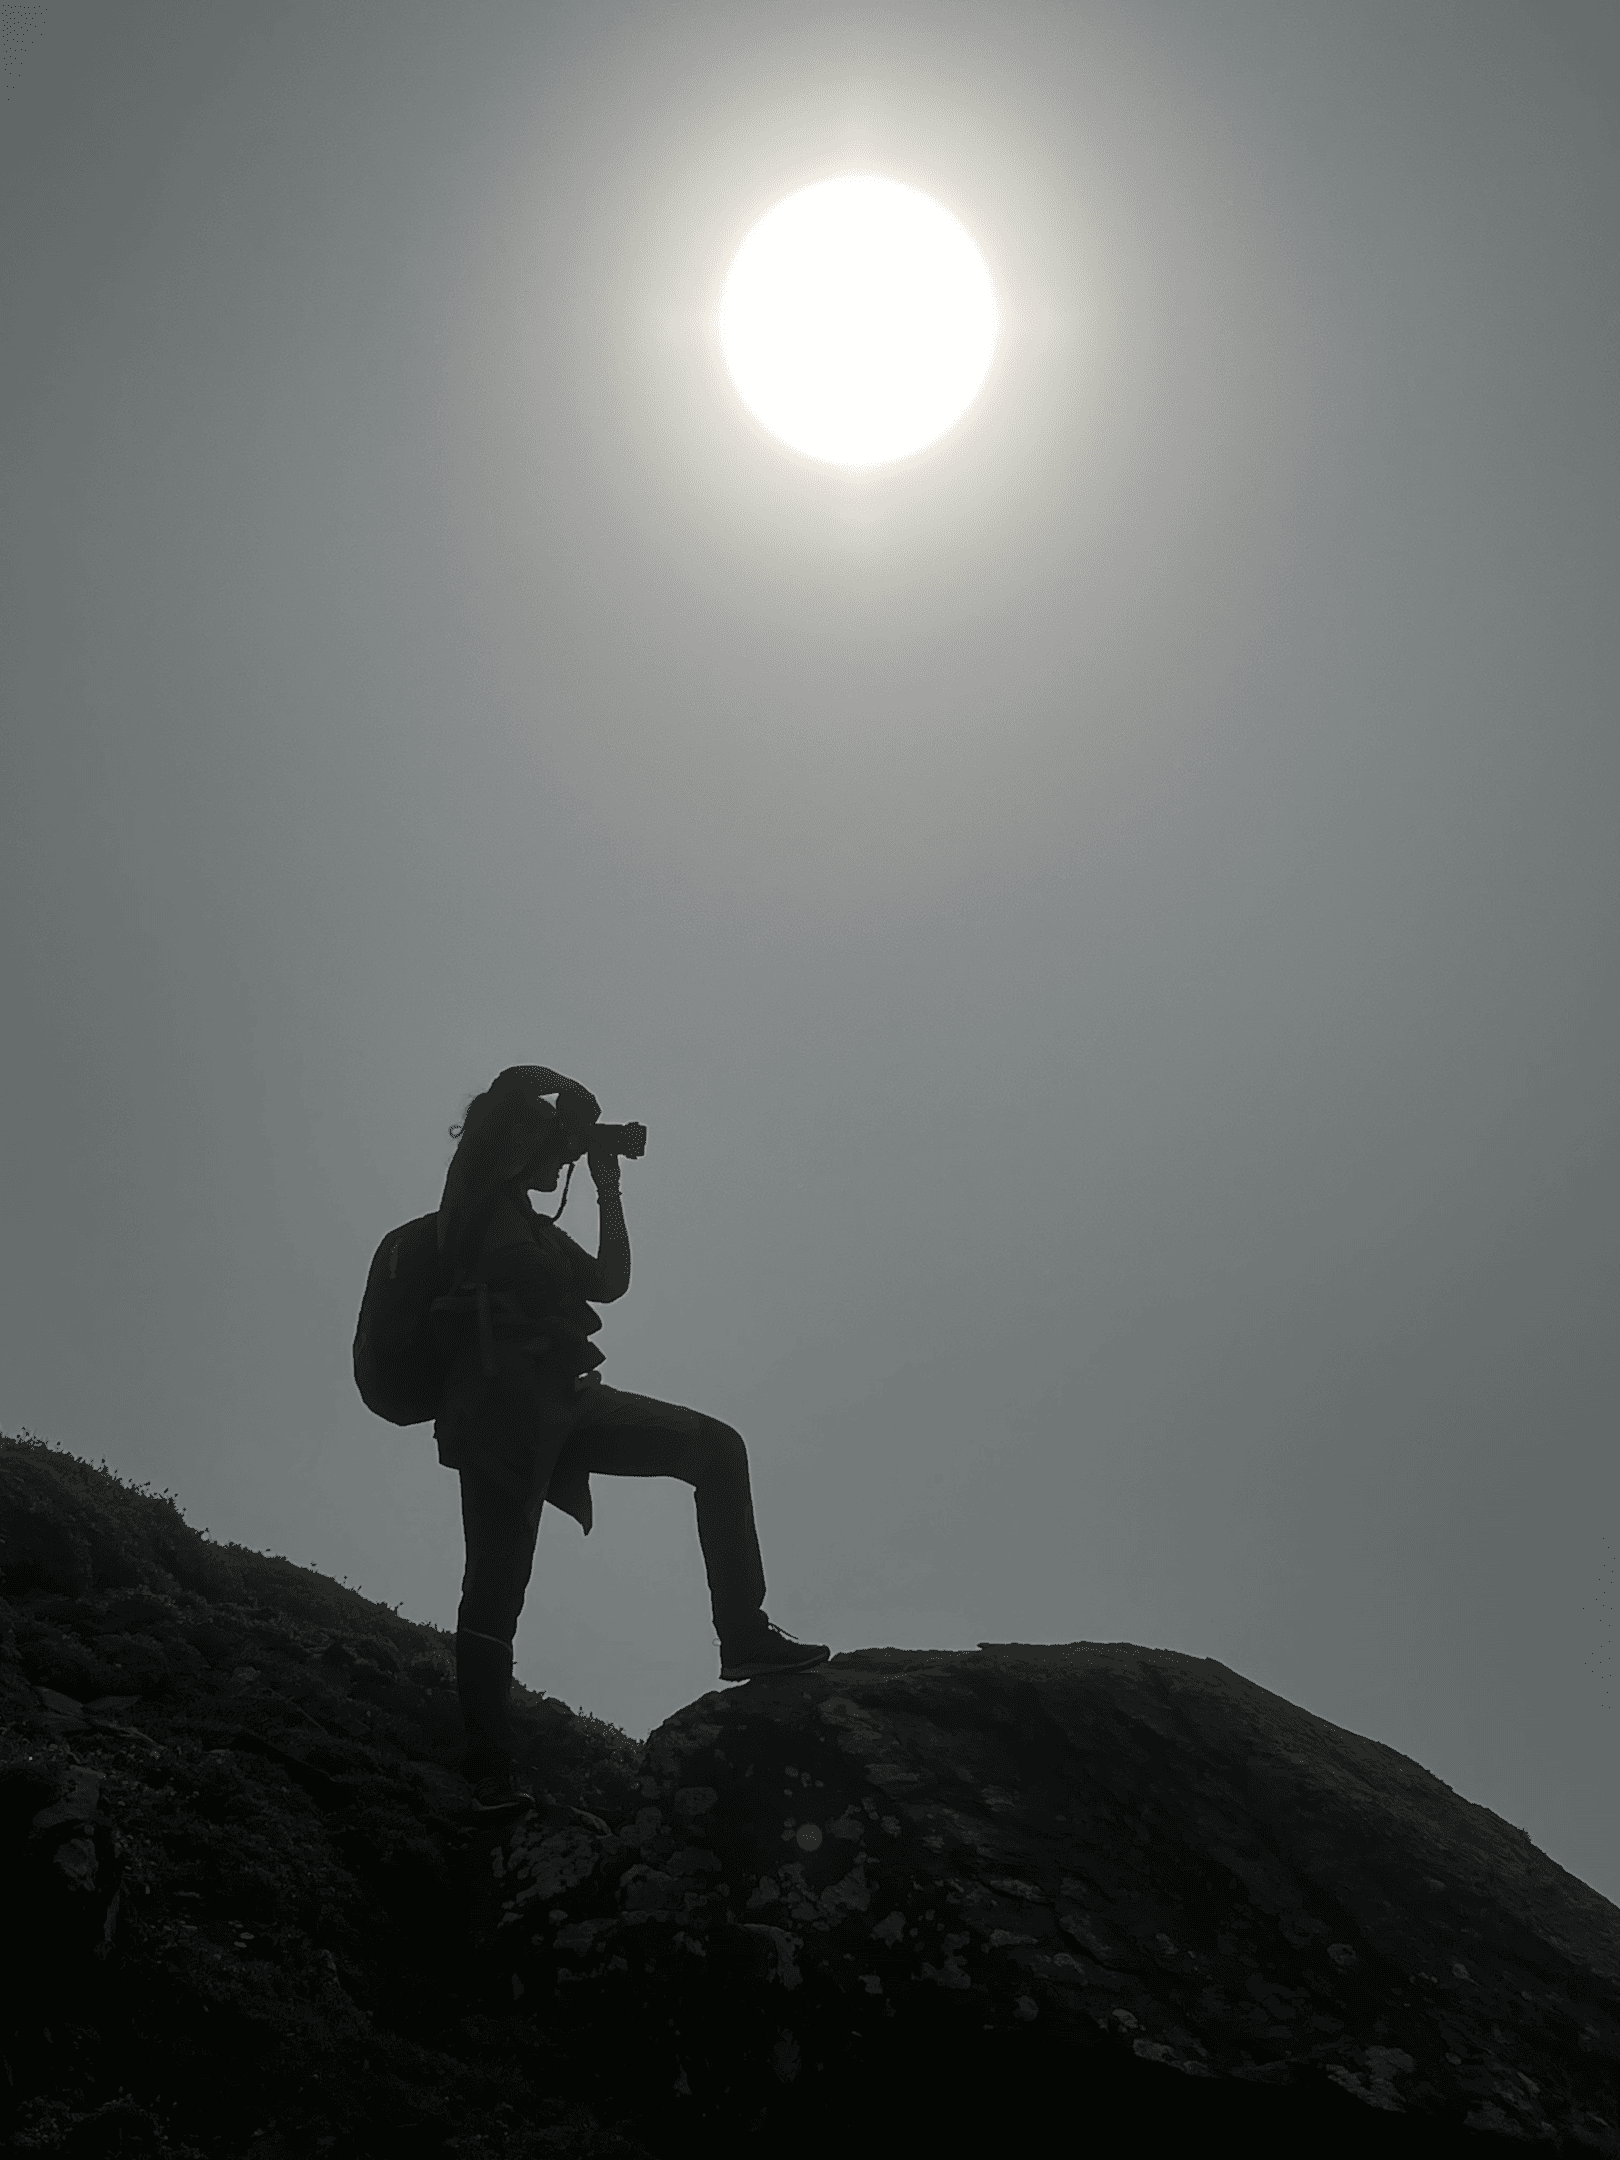 grey image of women clicking a picture under the sun